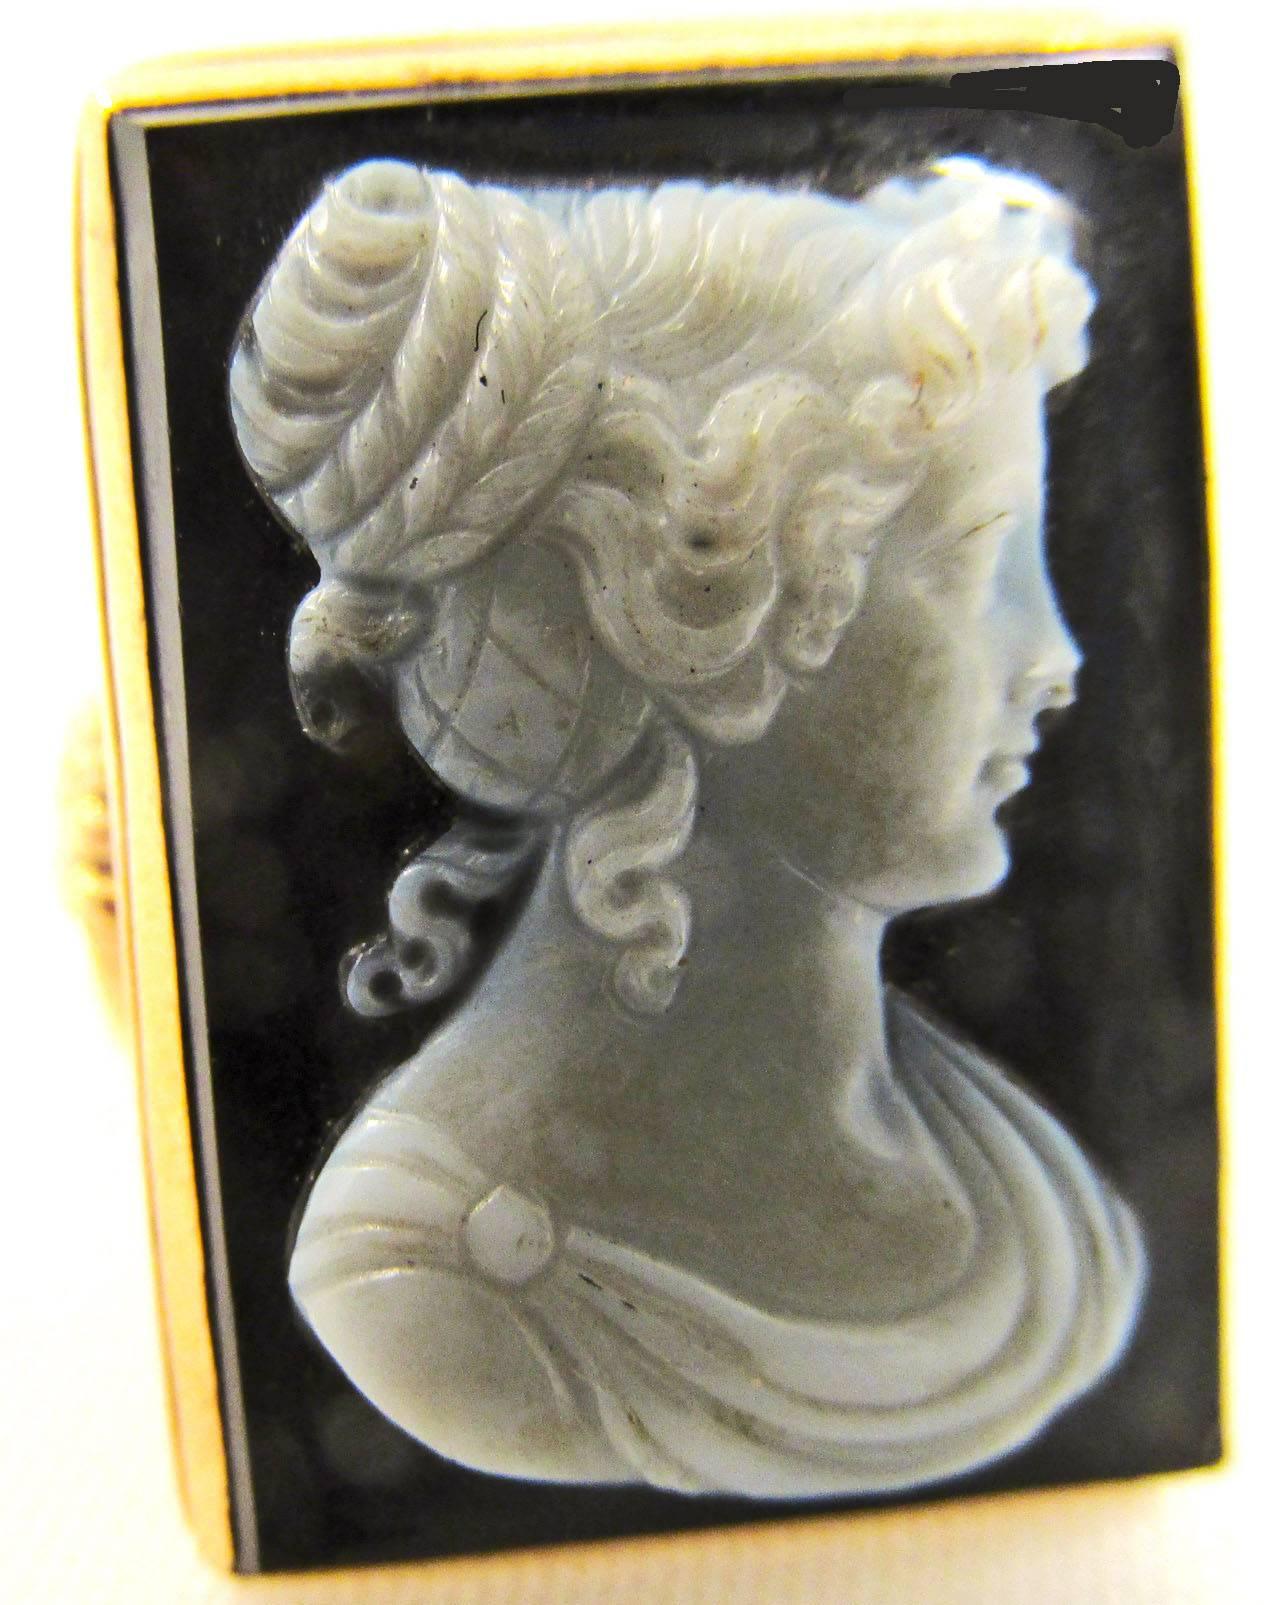 Elegant turn of century onyx cameo ring set in 14K gold depicting the profile of a lovely young Roman lady. The ring dates to 1900 and is a size 10. 